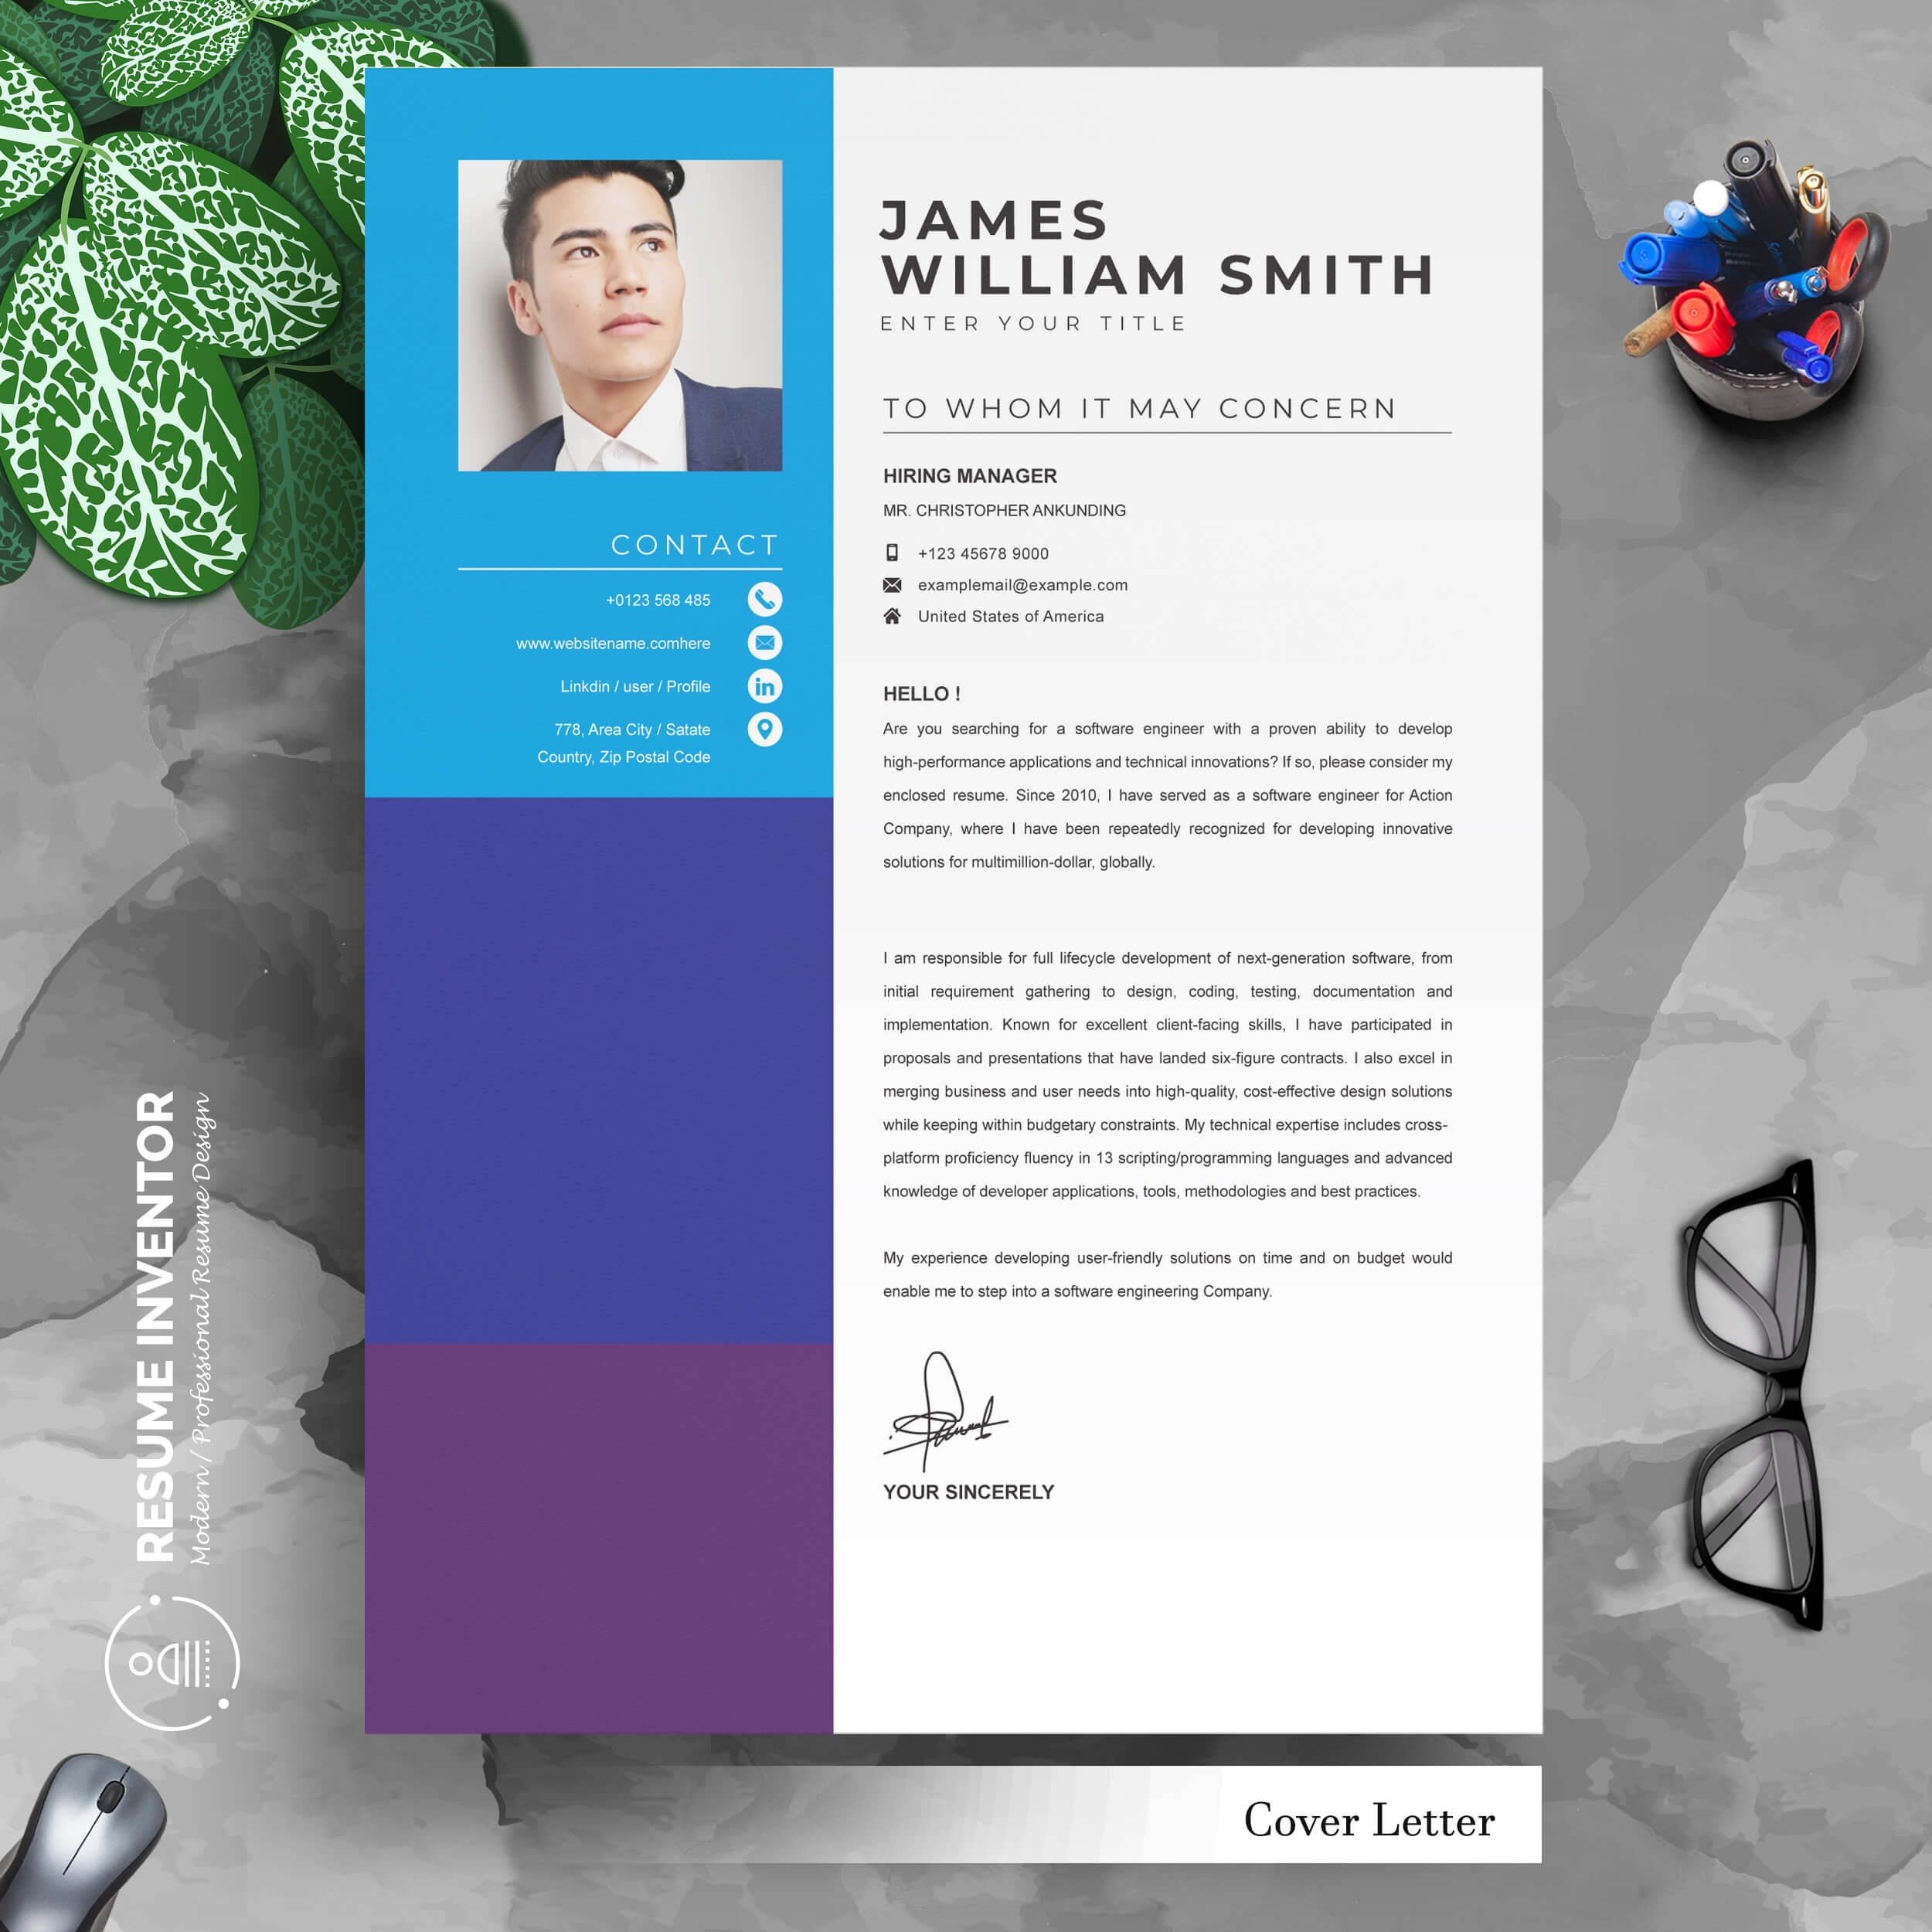 03 3 pages professional ms word aple pages eps photoshop psd resume cv design template design by resume inventor 67